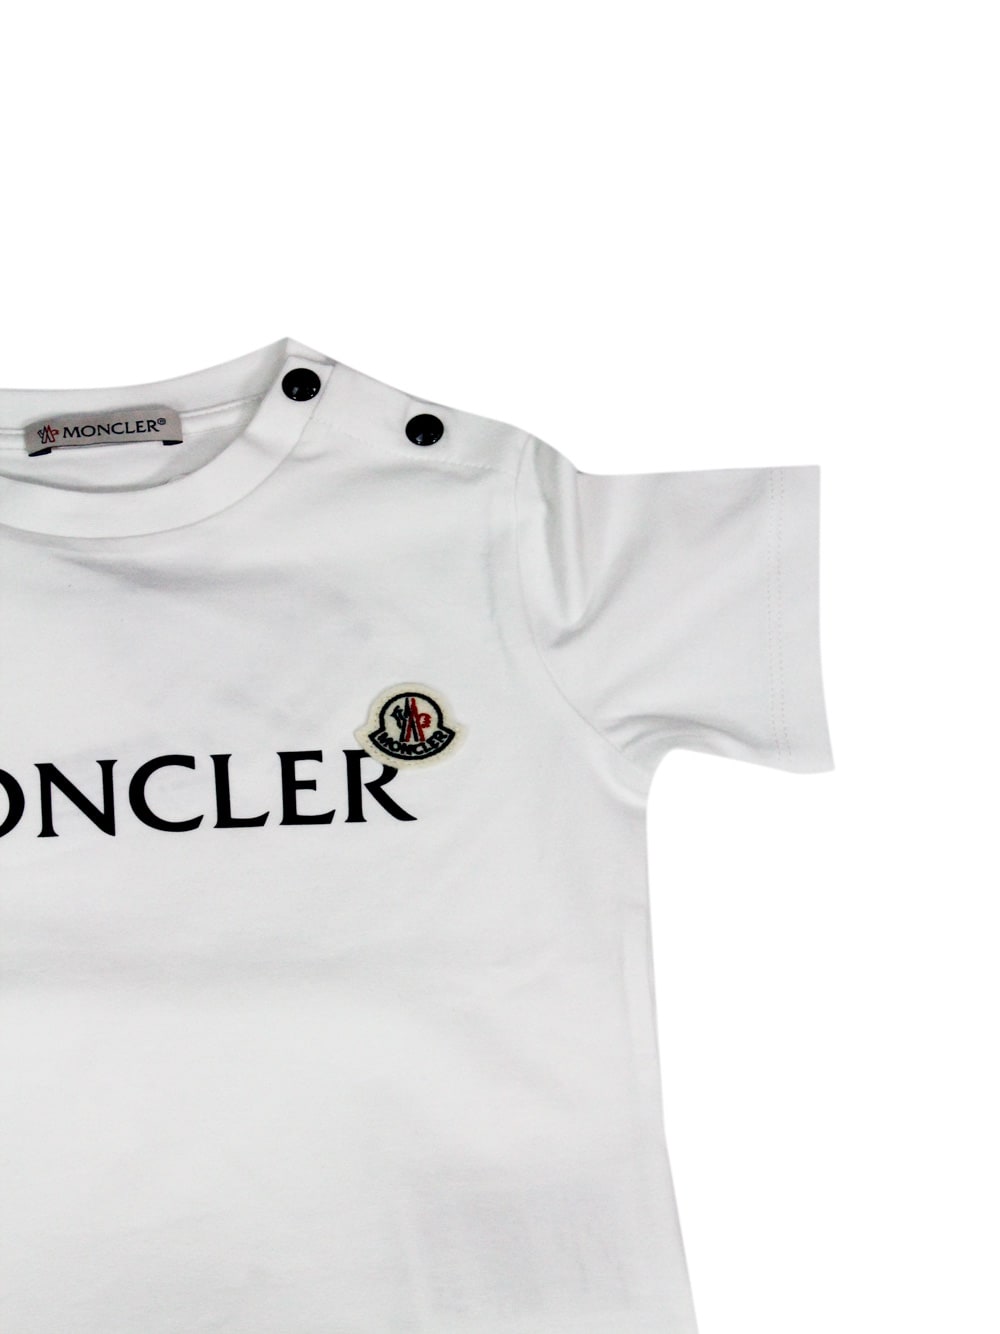 Shop Moncler Complete With Short-sleeved Crew-neck T-shirt And Shorts With Elasticated Waist And Side Pockets. Lo In White - Blu